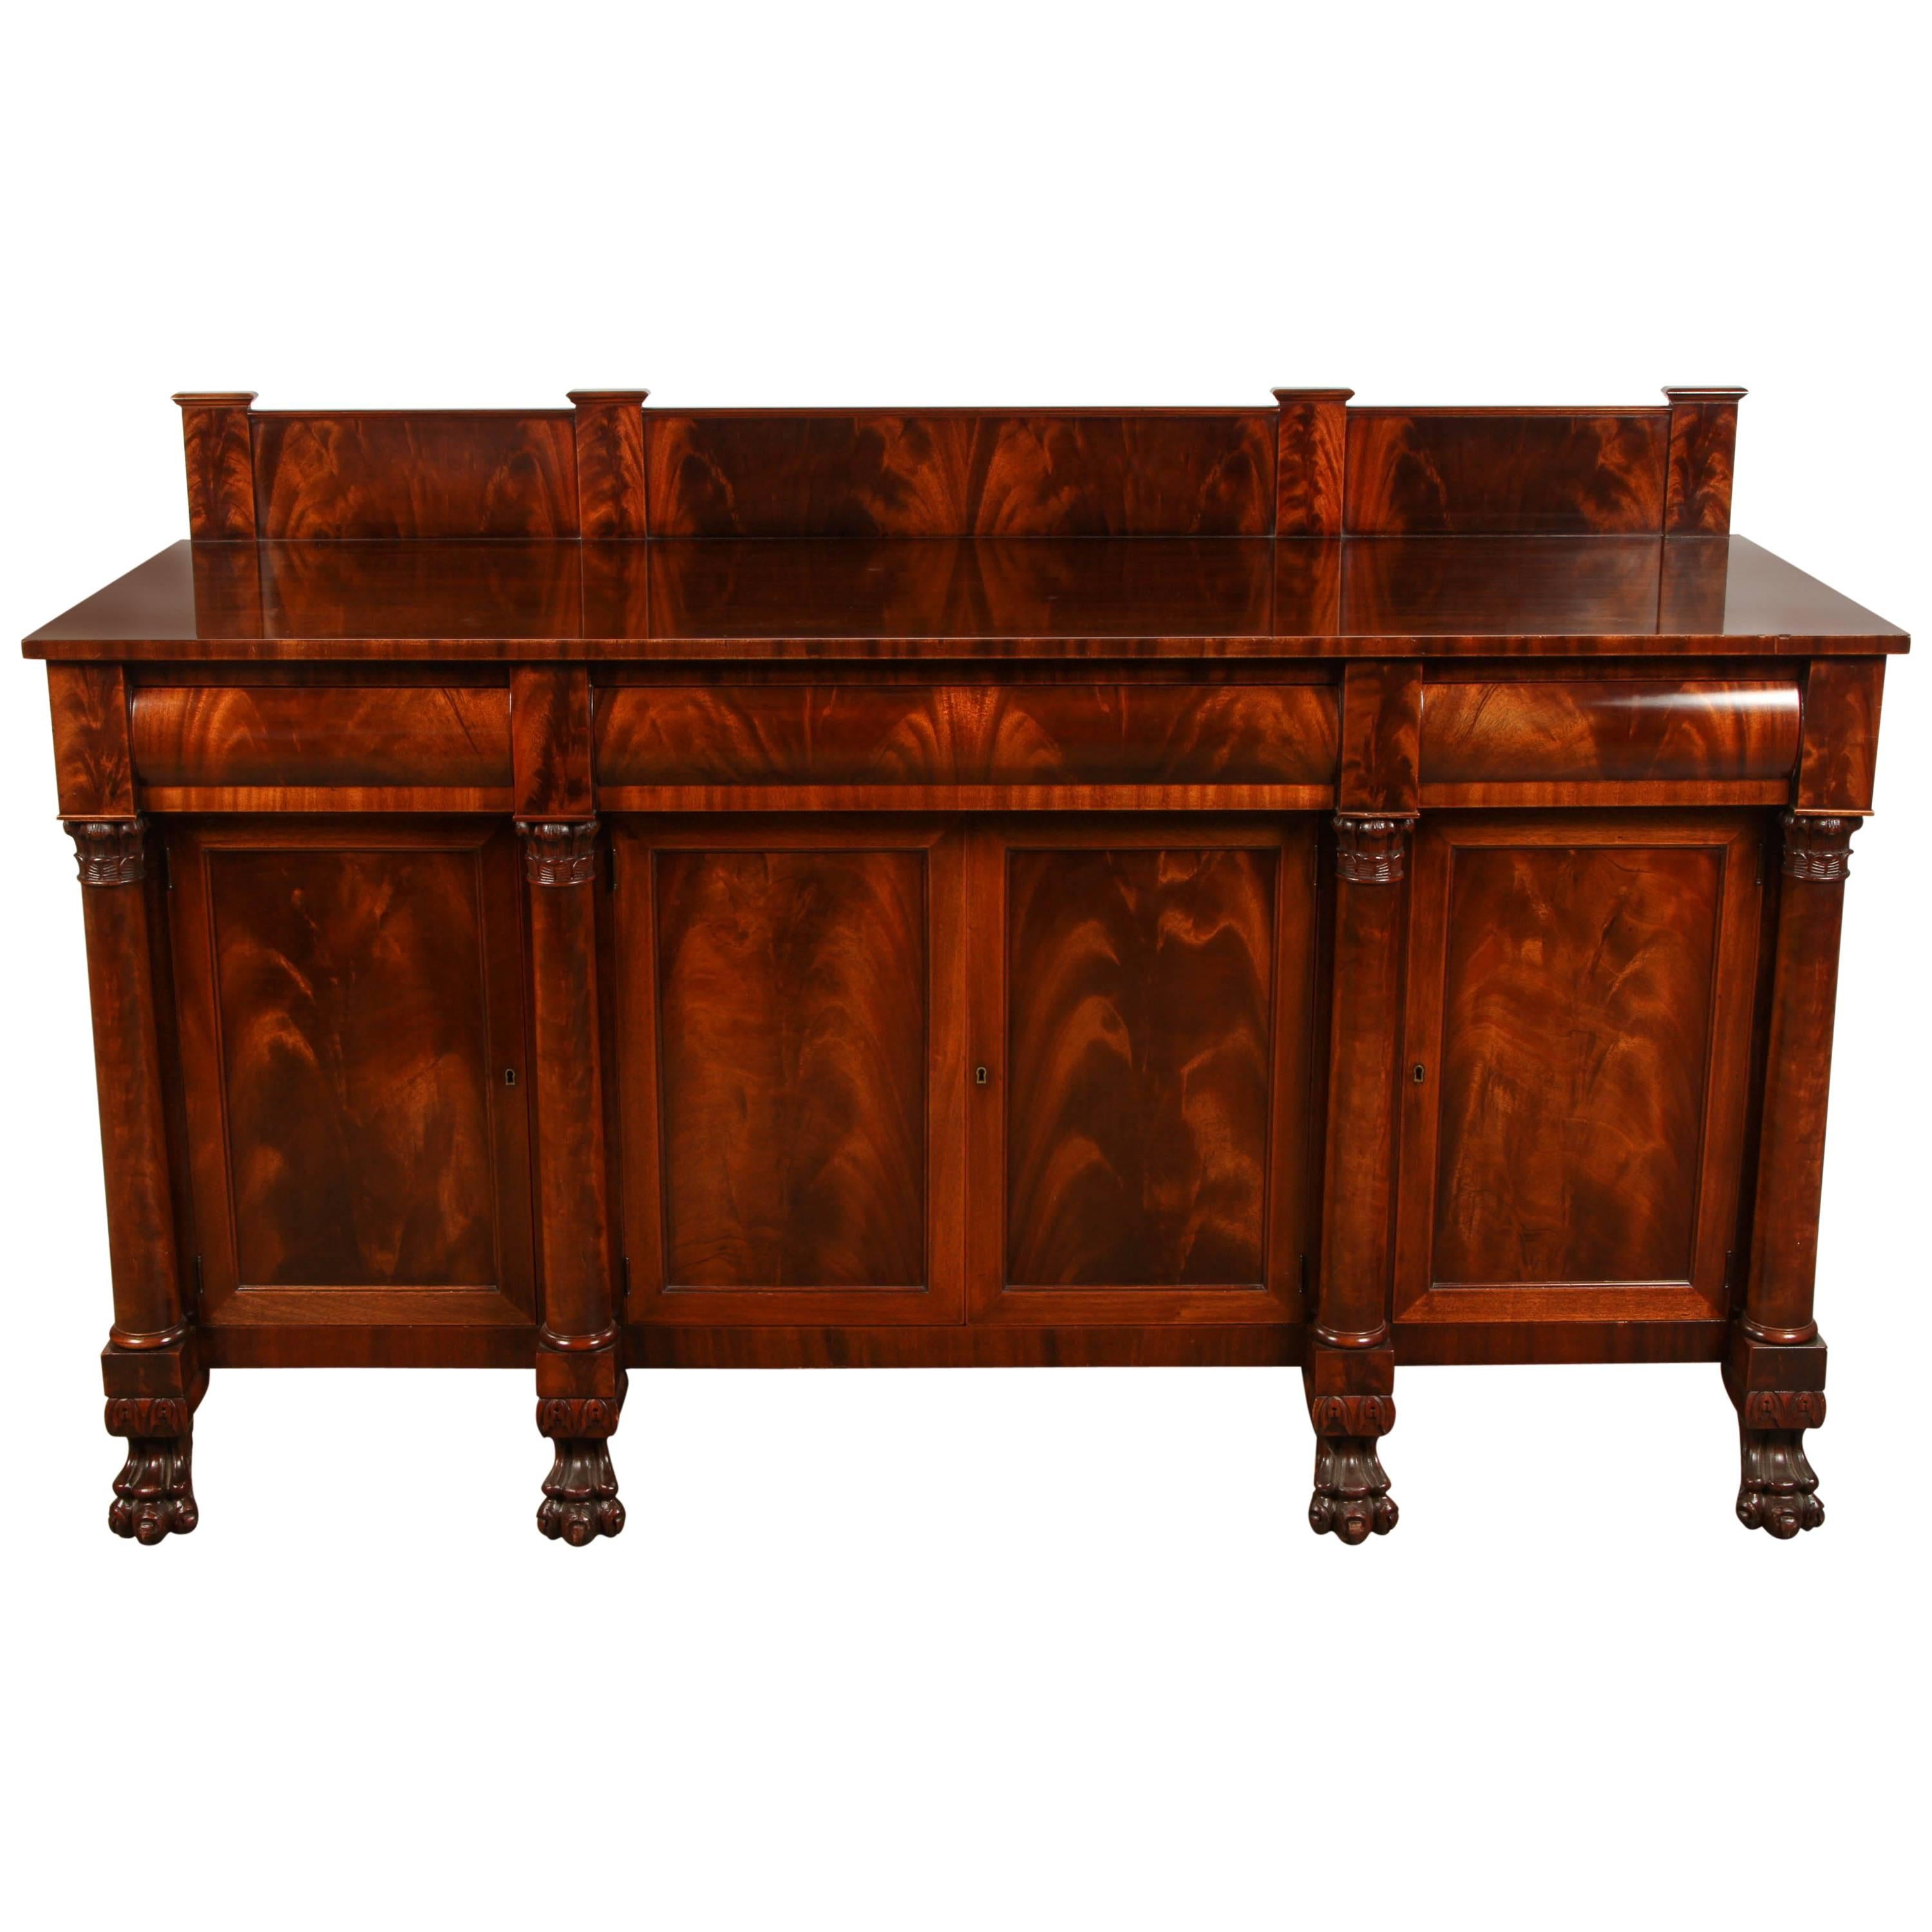 American Mahogany Sideboard Manufactured by Hathaway